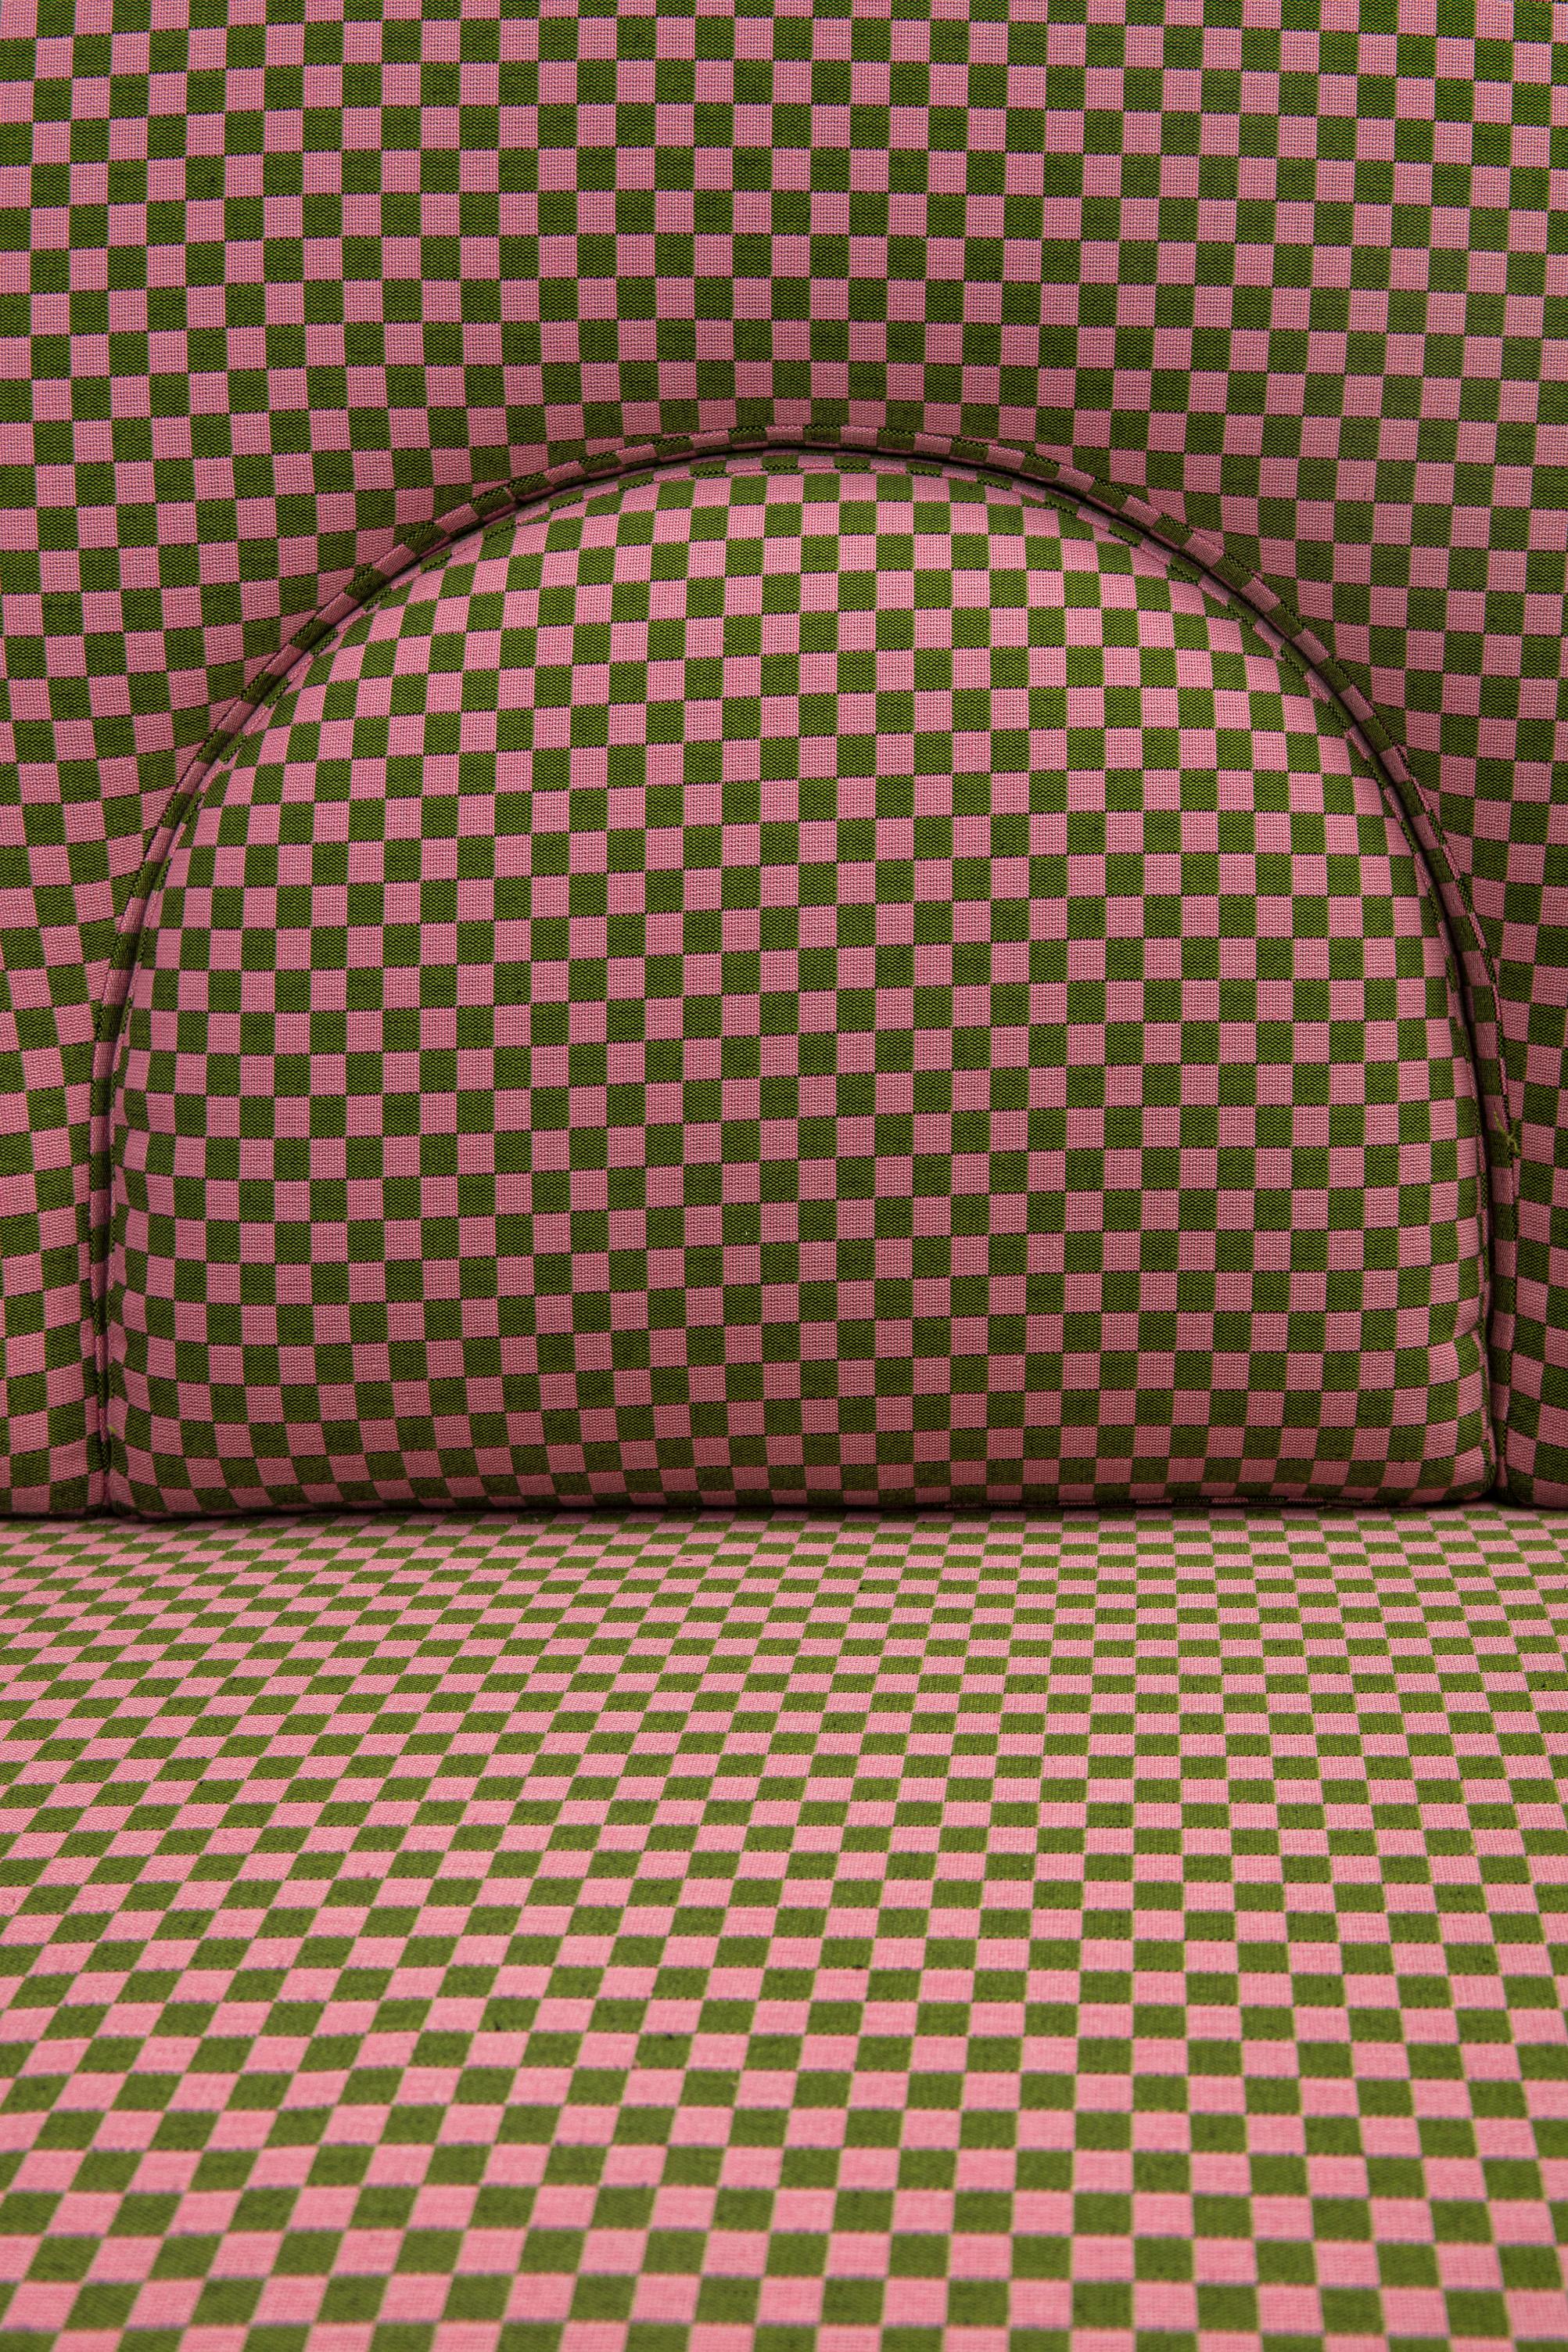 N-Gene Armchair with Cherry Checker Fabric and Olive Leather For Sale 2